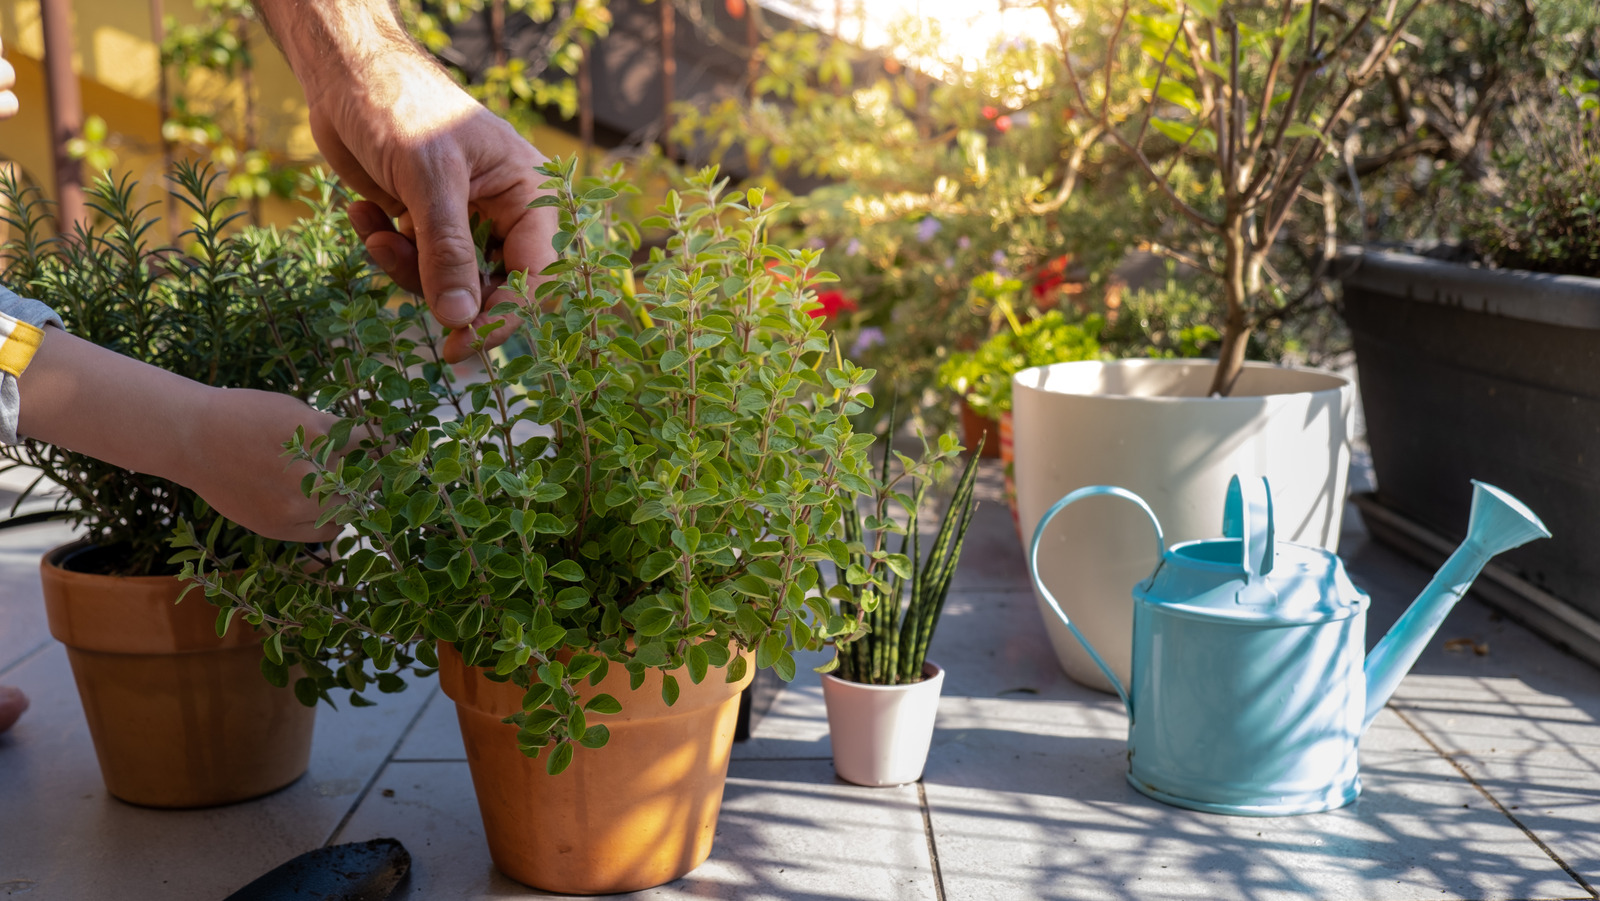 The Best Way To Harvest Oregano From Your Garden